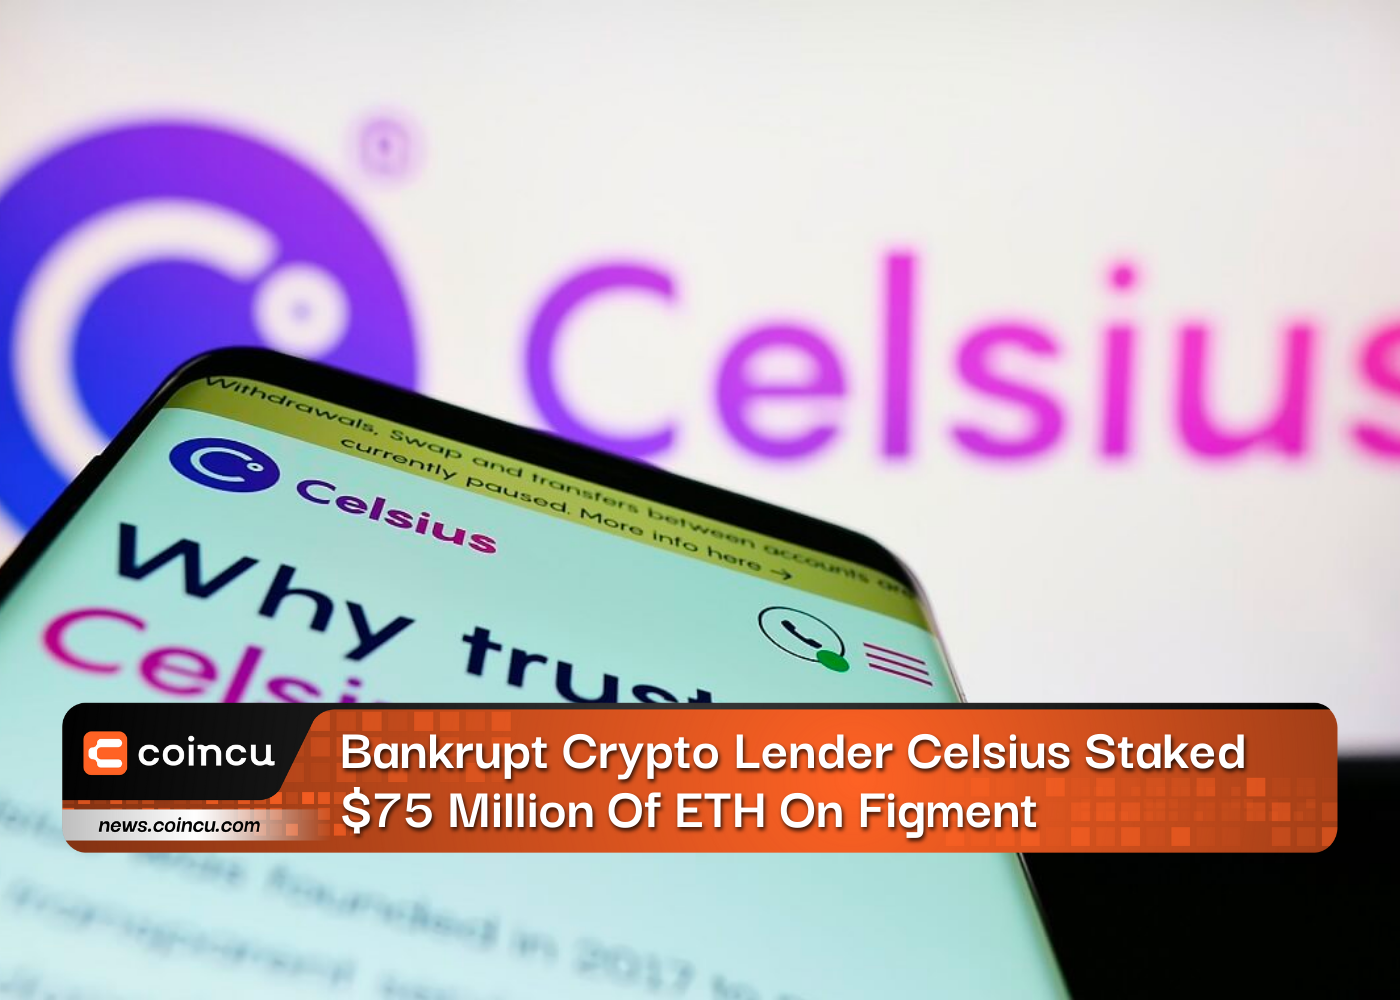 Bankrupt Crypto Lender Celsius Staked $75 Million Of ETH On Figment